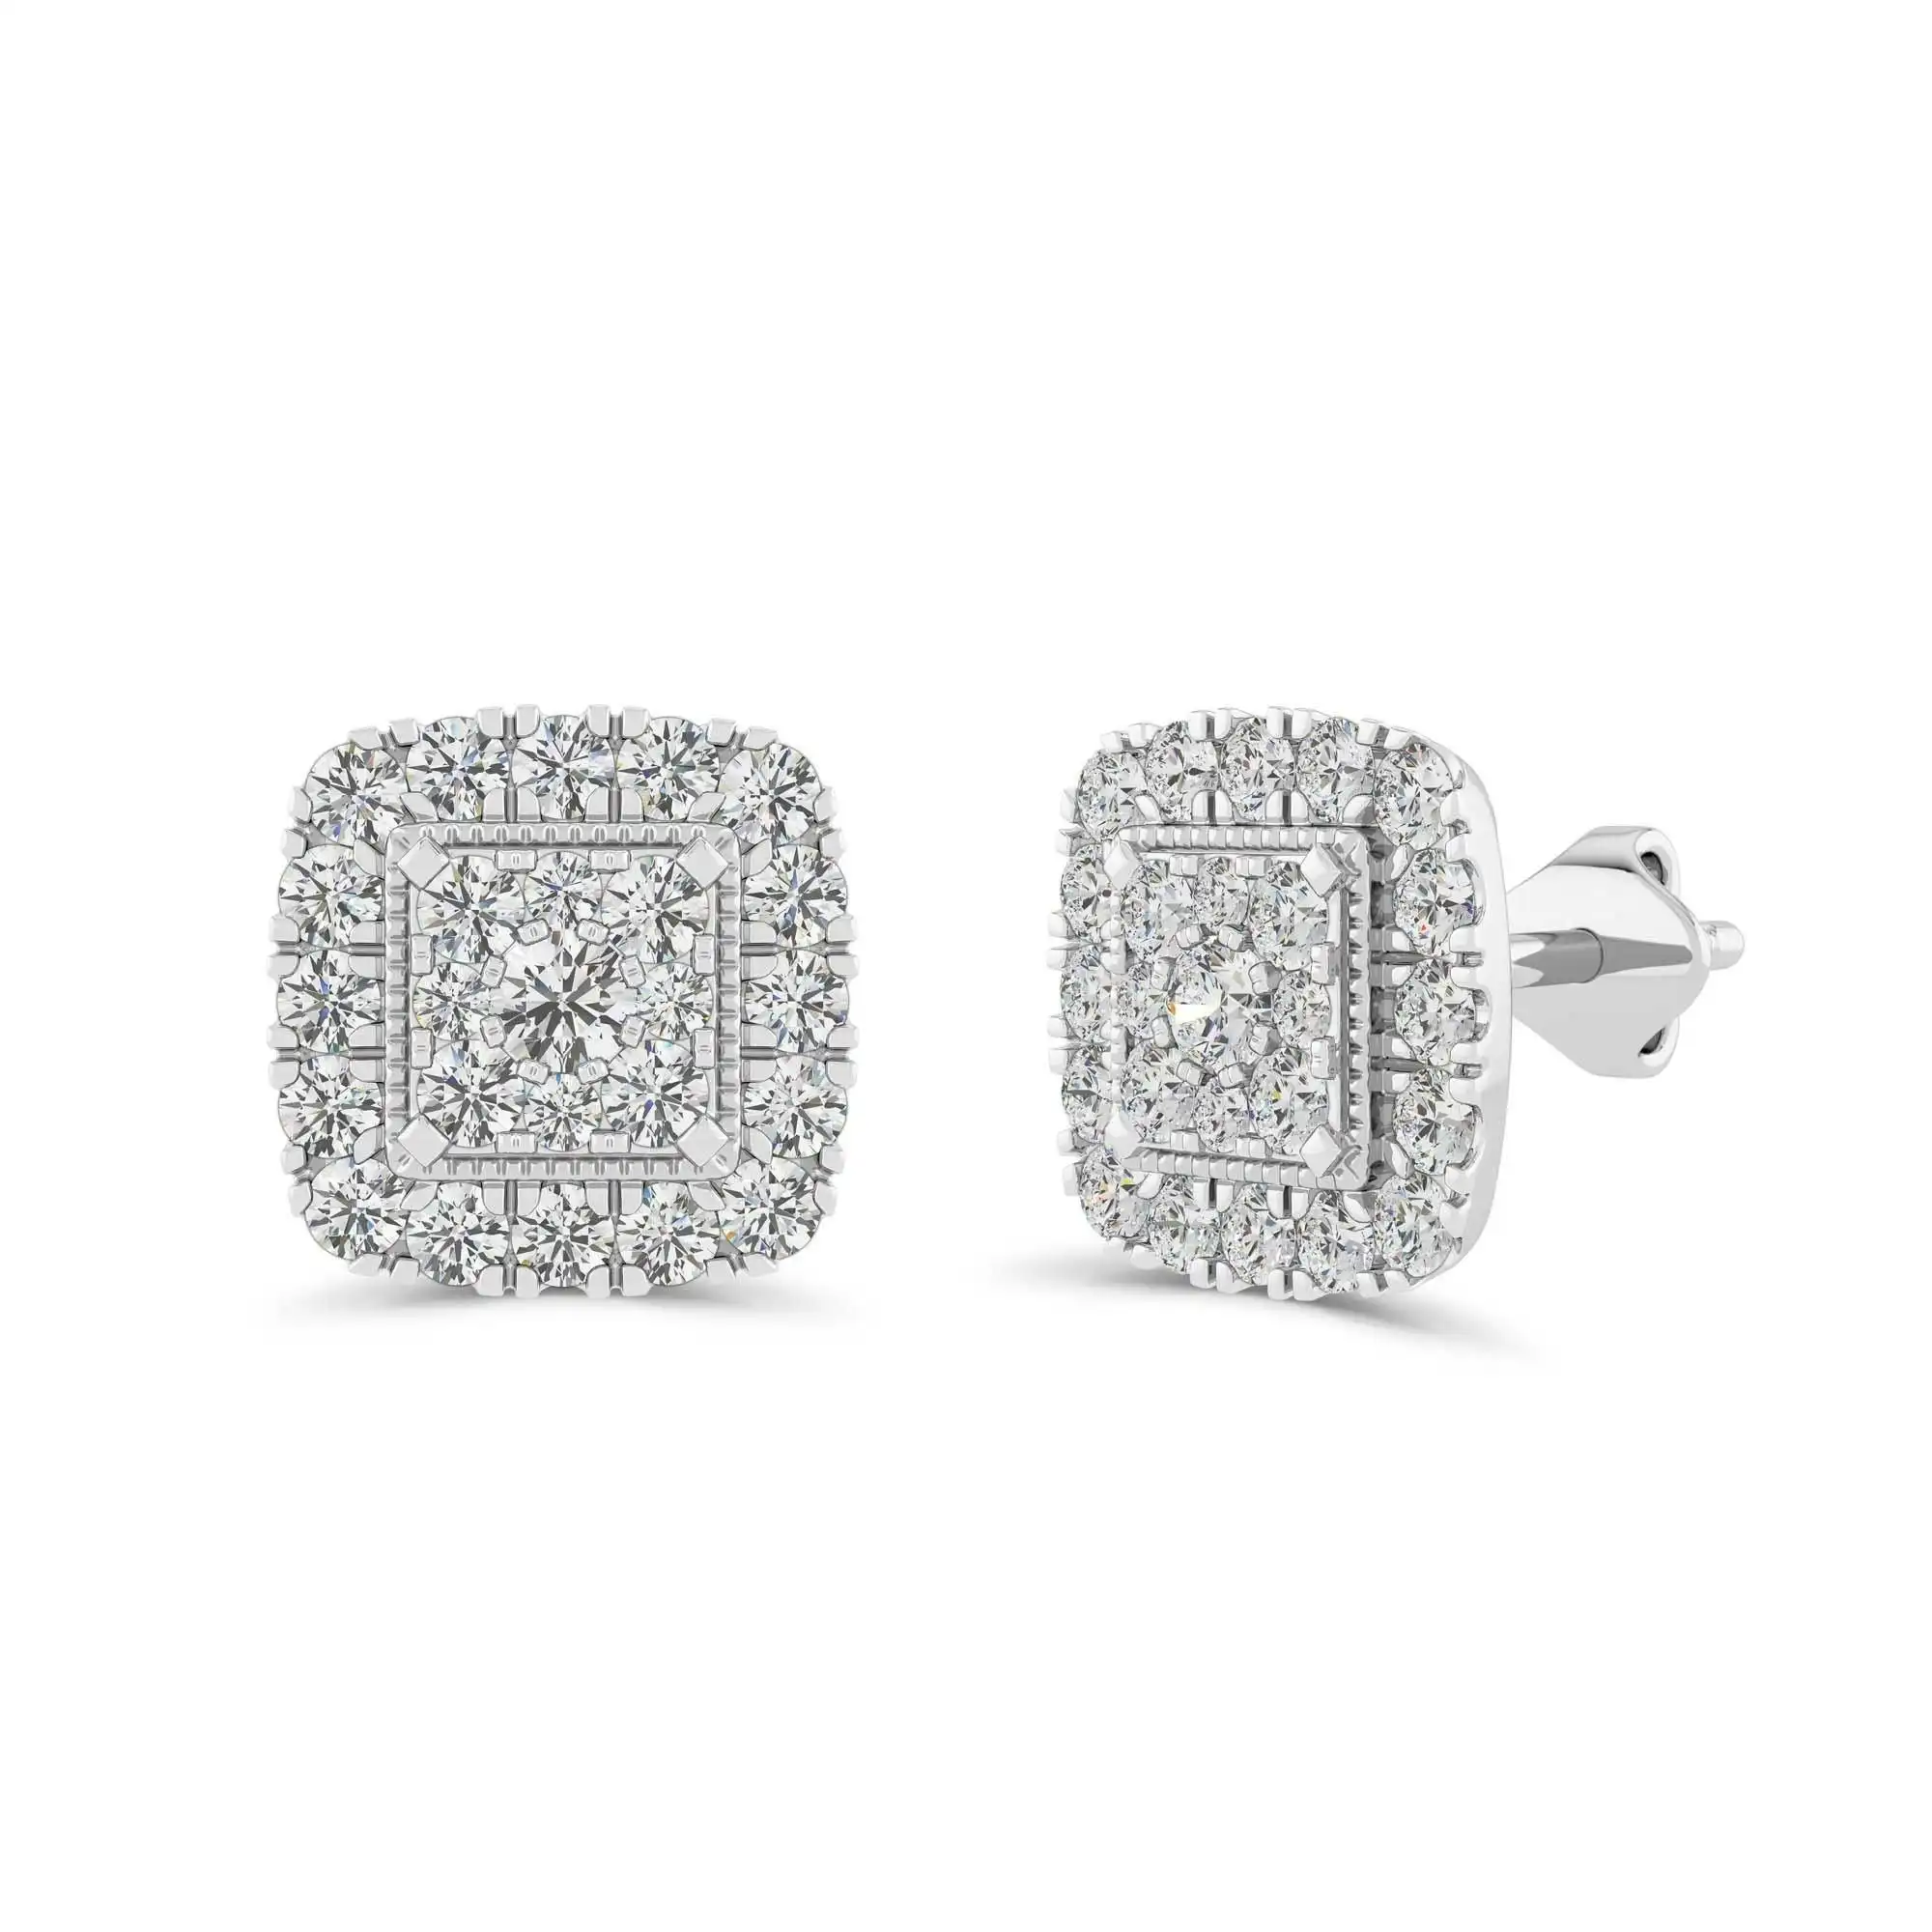 Square Look Stud Earrings with 3/4ct of Diamonds in 9ct White Gold